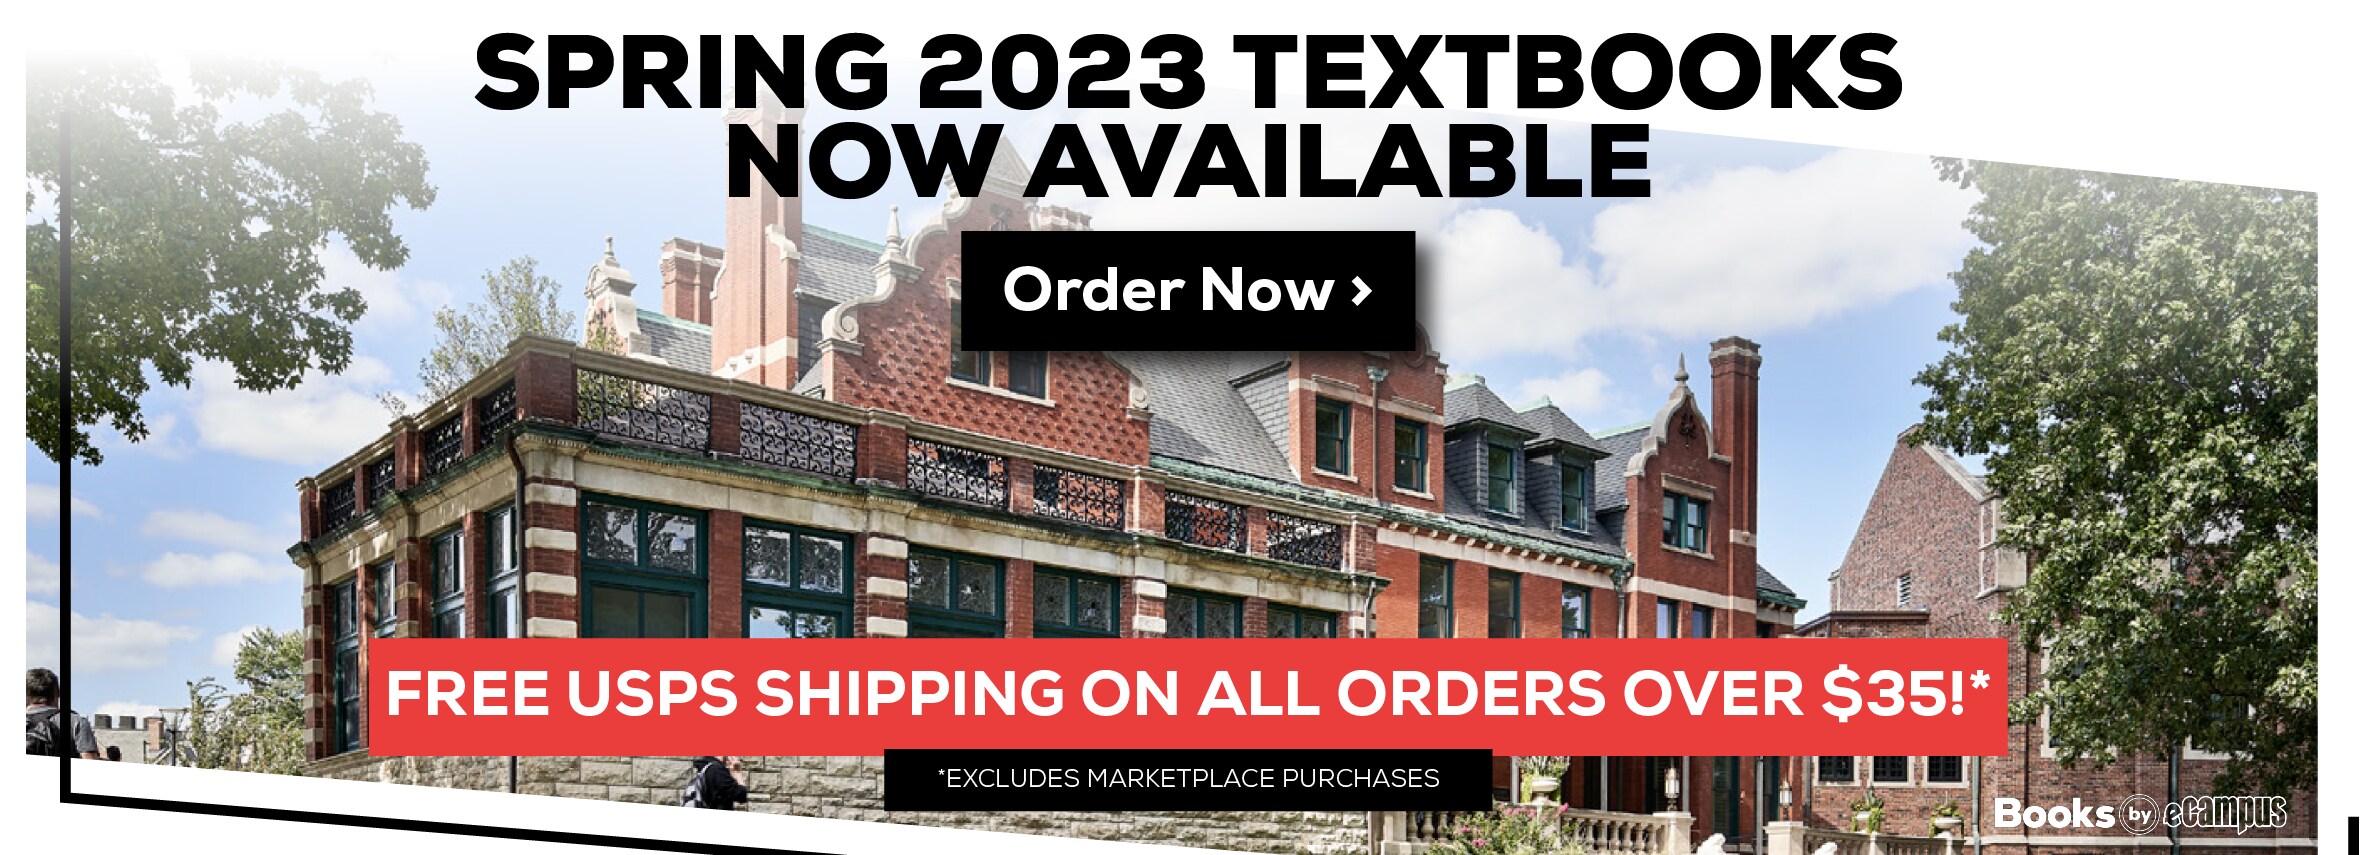 SPRING 2023 TEXTBOOKS NOW AVAILABLE Order Now > FREE USPS SHIPPING ON ALL ORDERS OVER $35!* *EXCLUDES MARKETPLACE PURCHASES